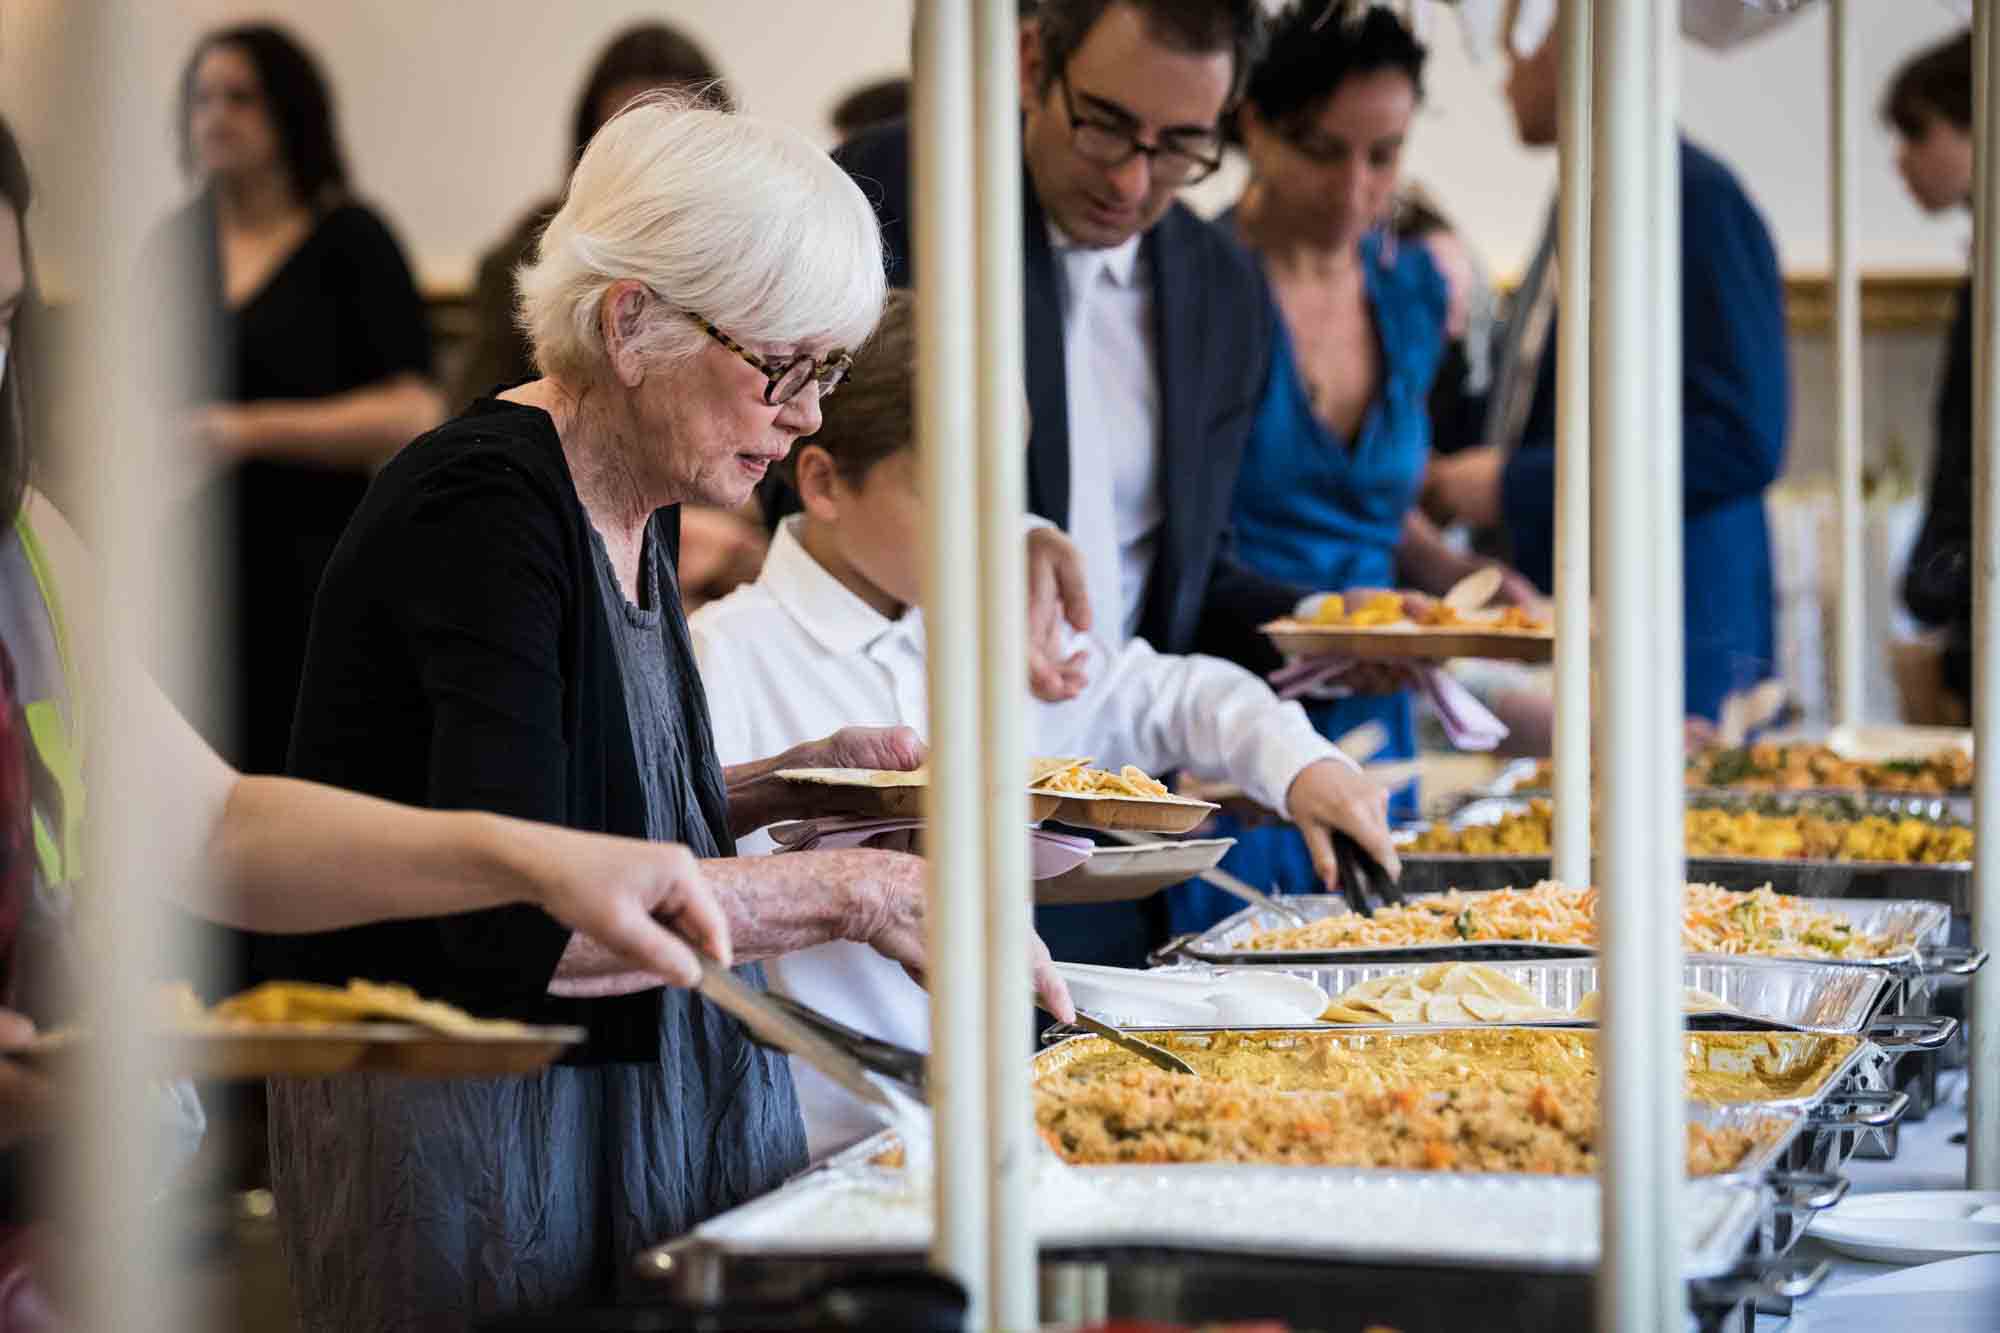 Hindu Temple Society of North America wedding photos of guests selecting food from canteen buffet